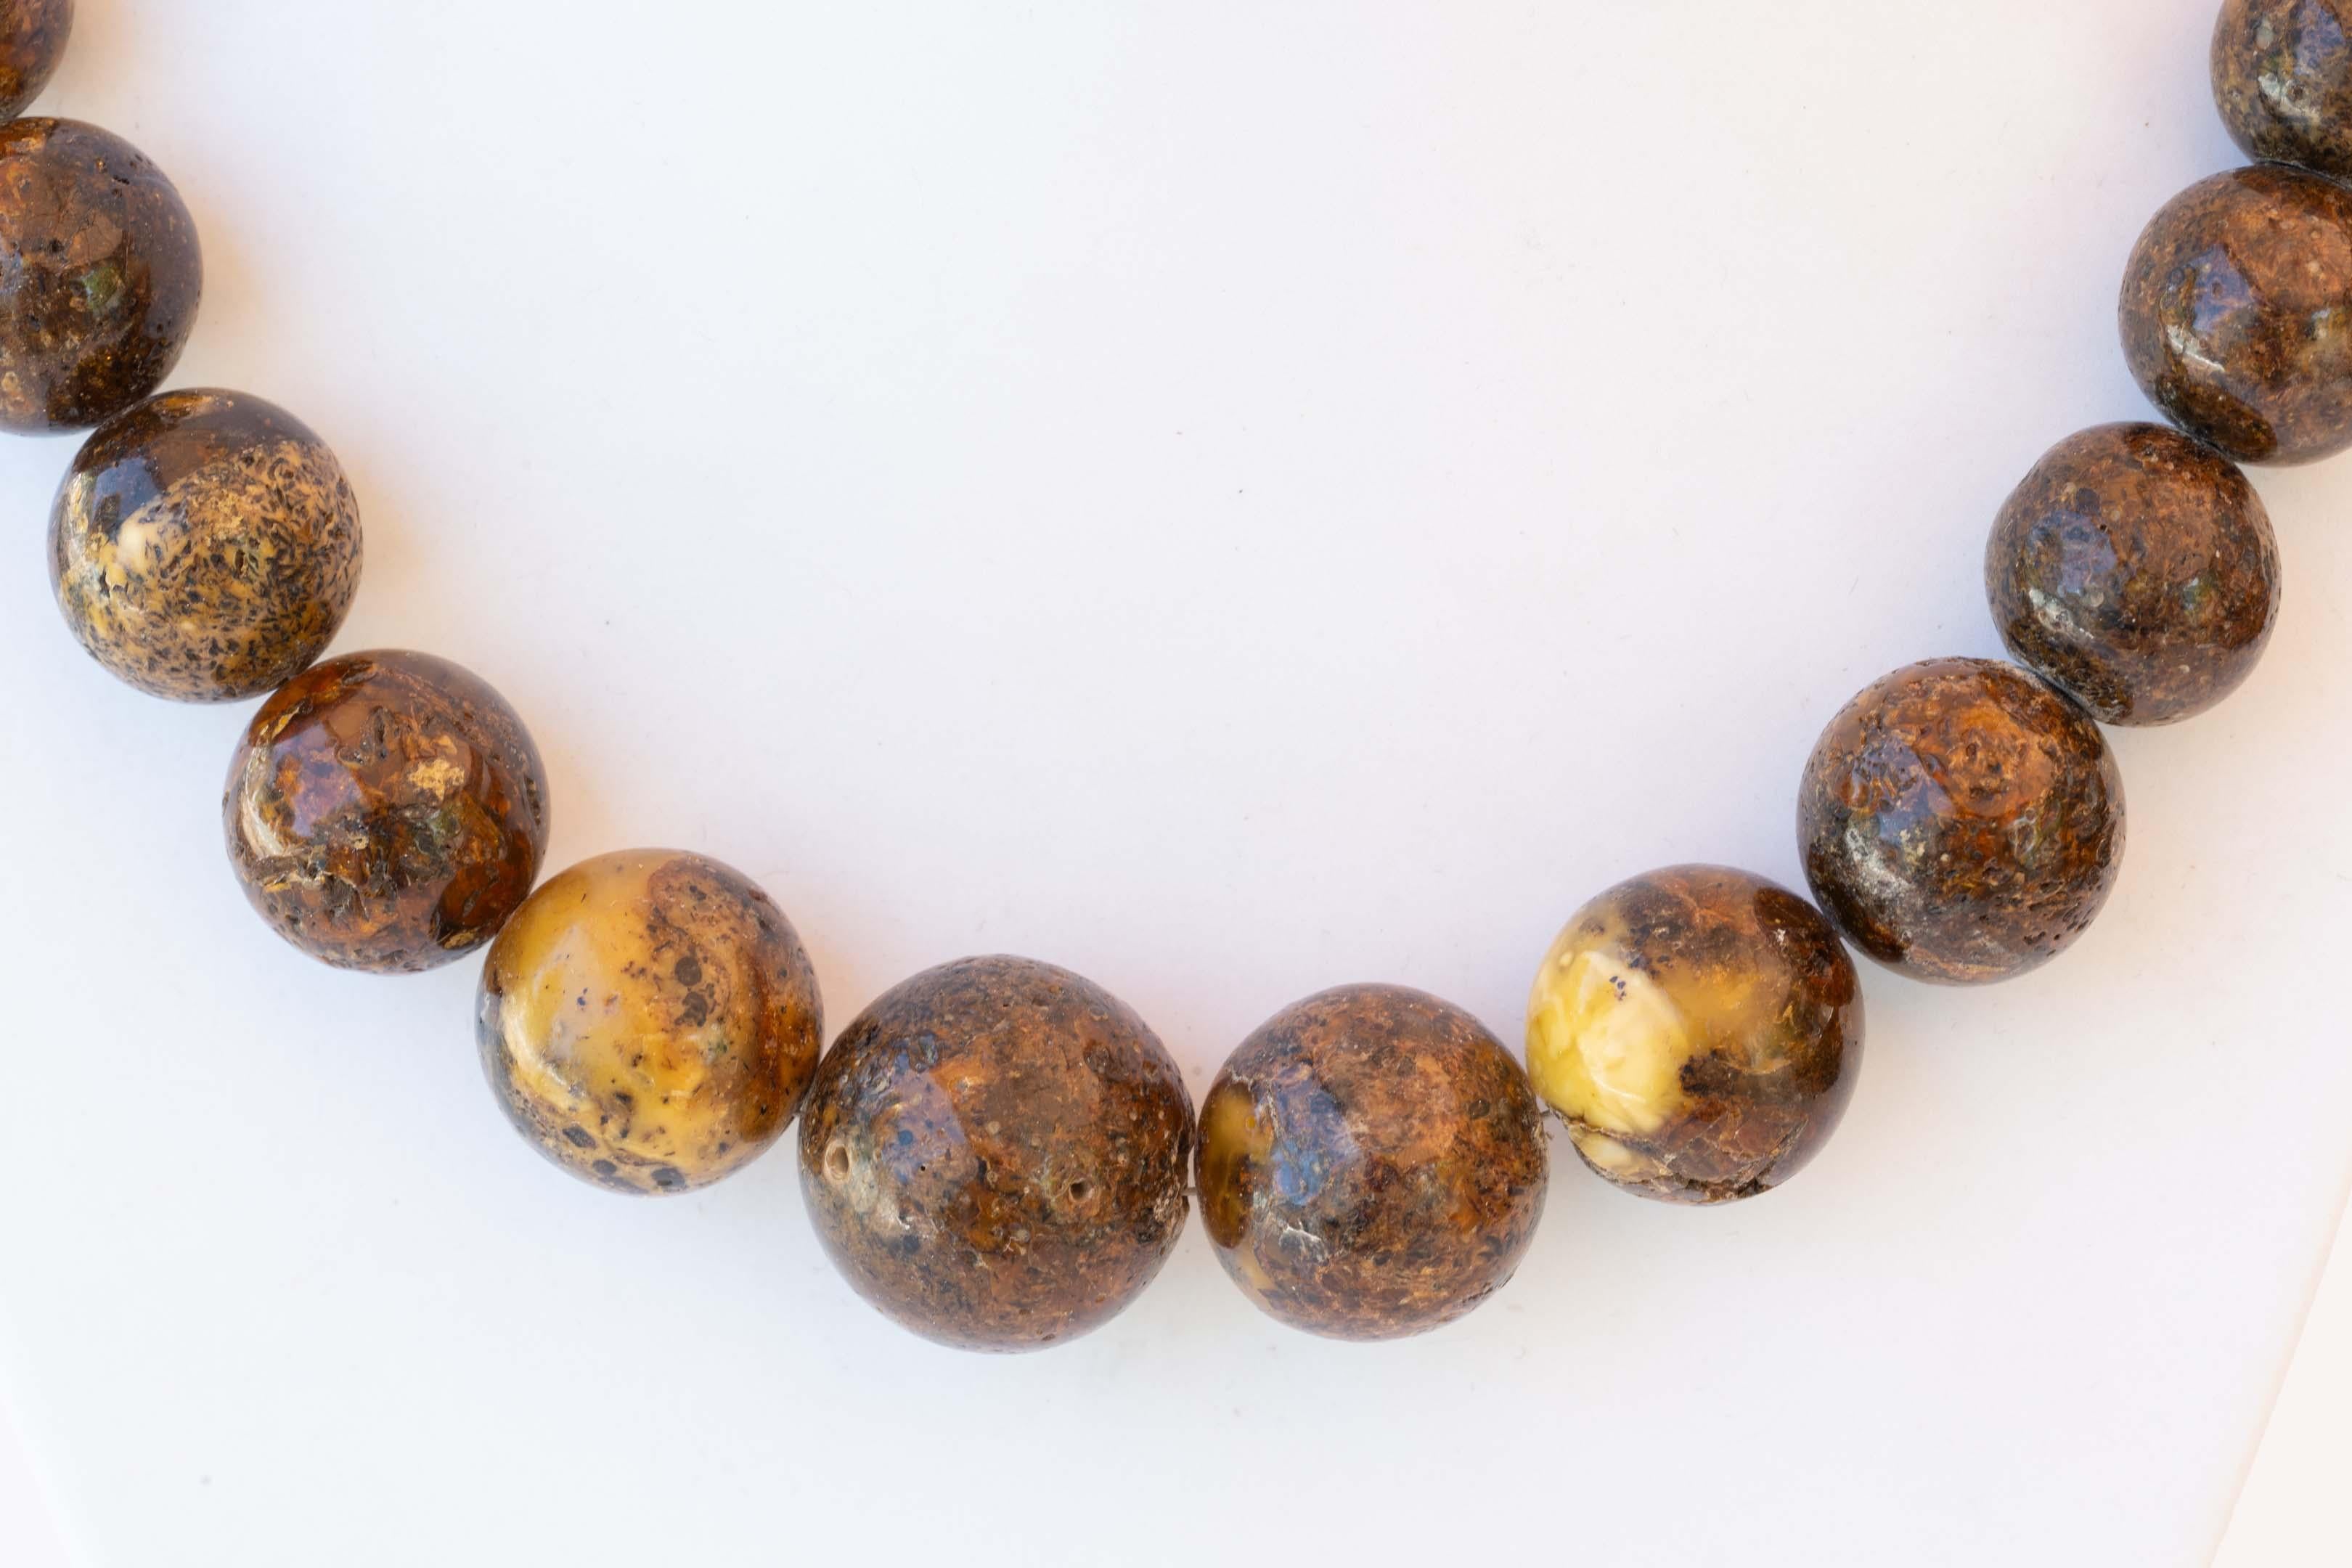 Natural Burmite root amber necklace measuring 20 inches long, weighs 82 grams. The beads are sized 13mm to 23 mm in diameter. Provenance from Burma region, tested in salt water.